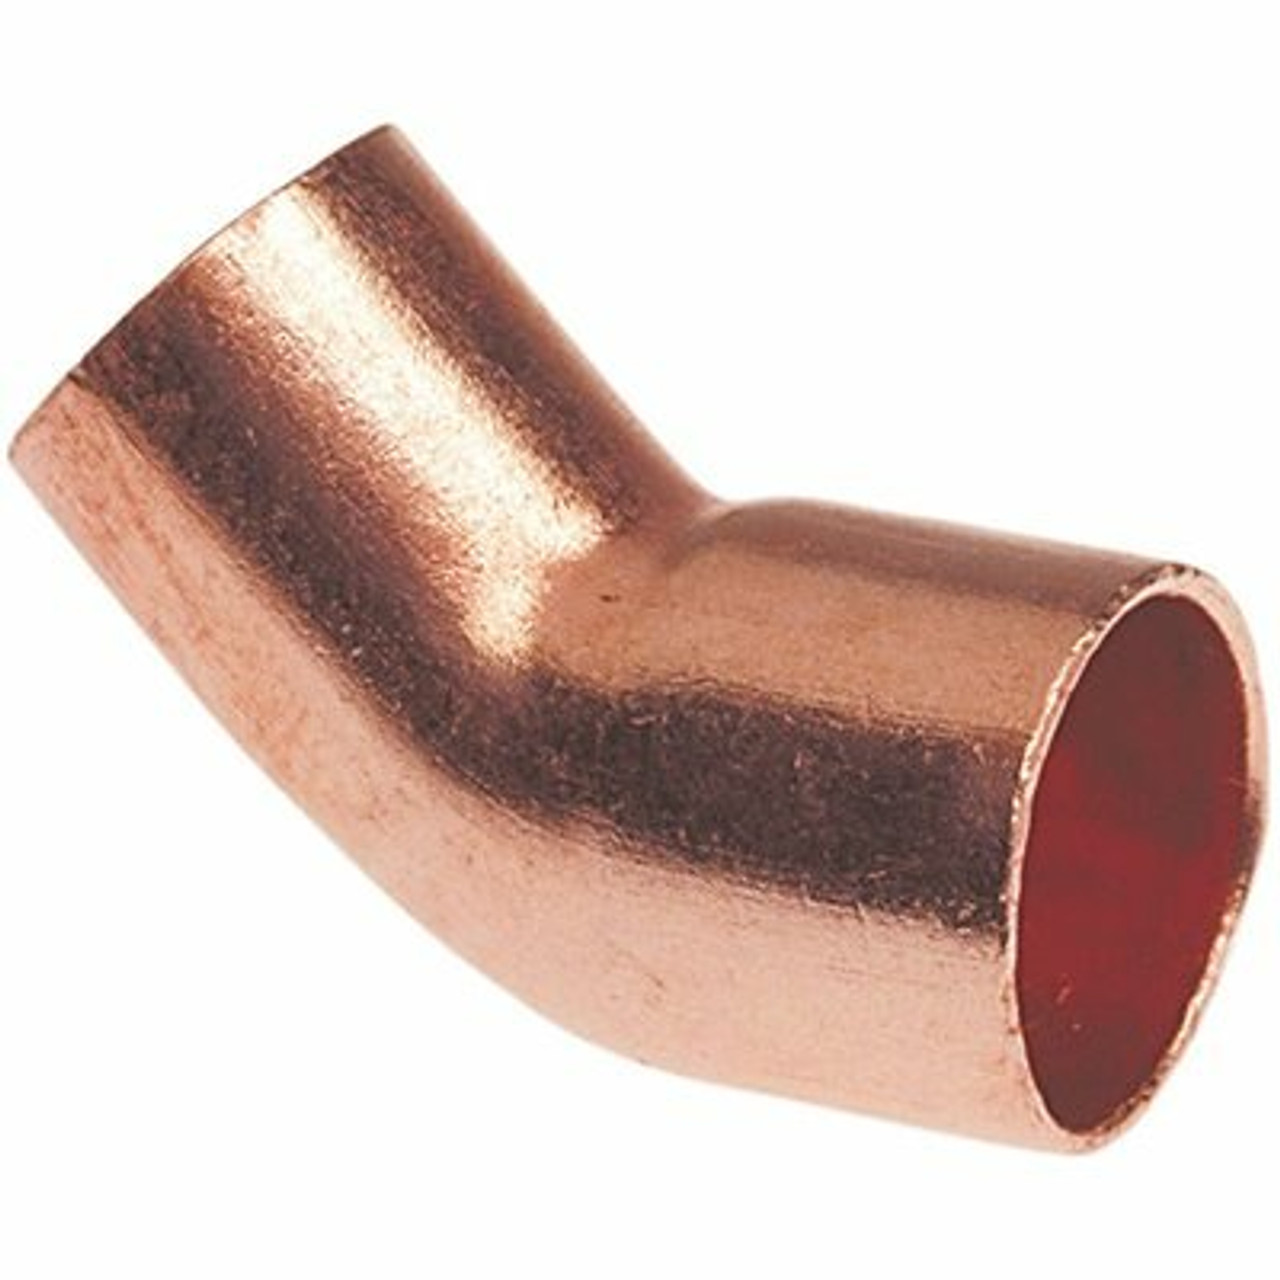 Everbilt 1 In. Copper Pressure 45-Degree Fitting X Cup Street Elbow